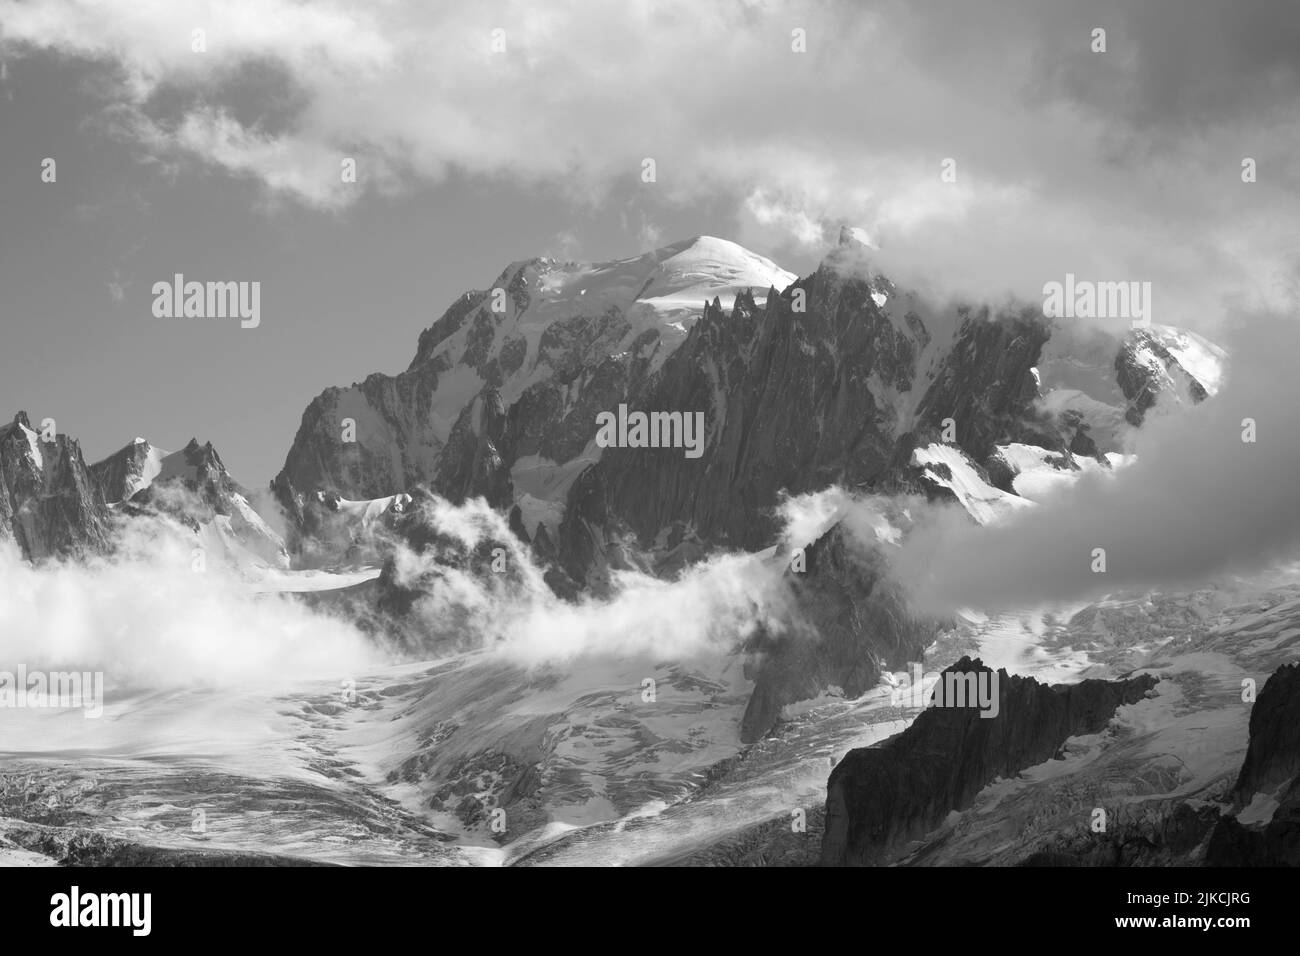 The Mont Blanc massif in the evening light and clouds. Stock Photo